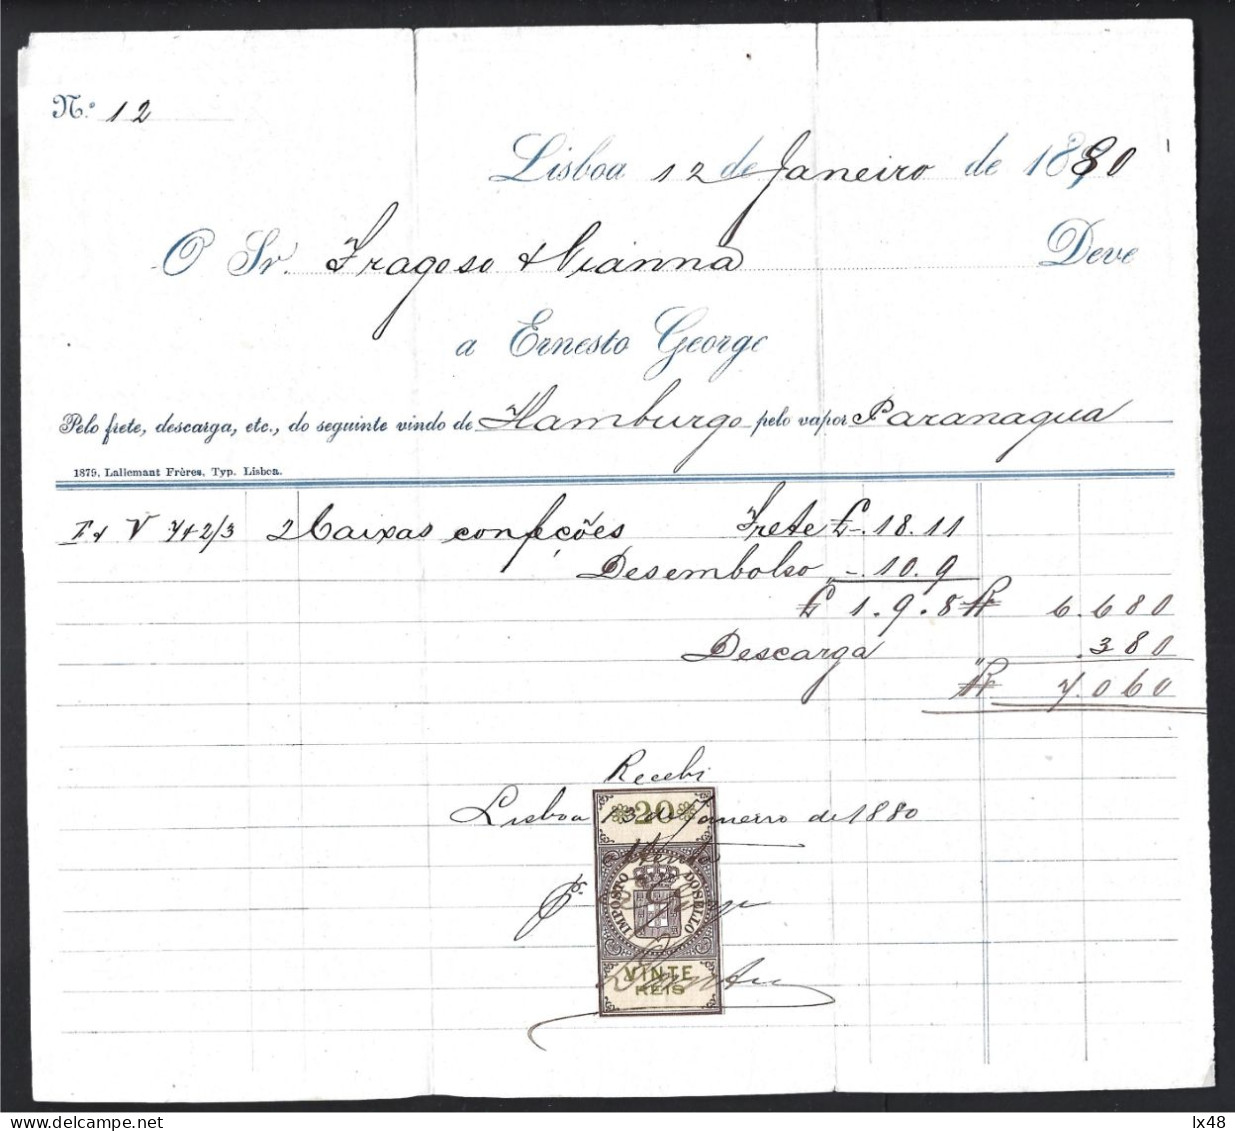 Receipt With Tax Stamp For 20 Réis King D. Luiz From 1880. Shipping And Unloading Of Ship 'Paranagua' Coming From Hambur - Portugal